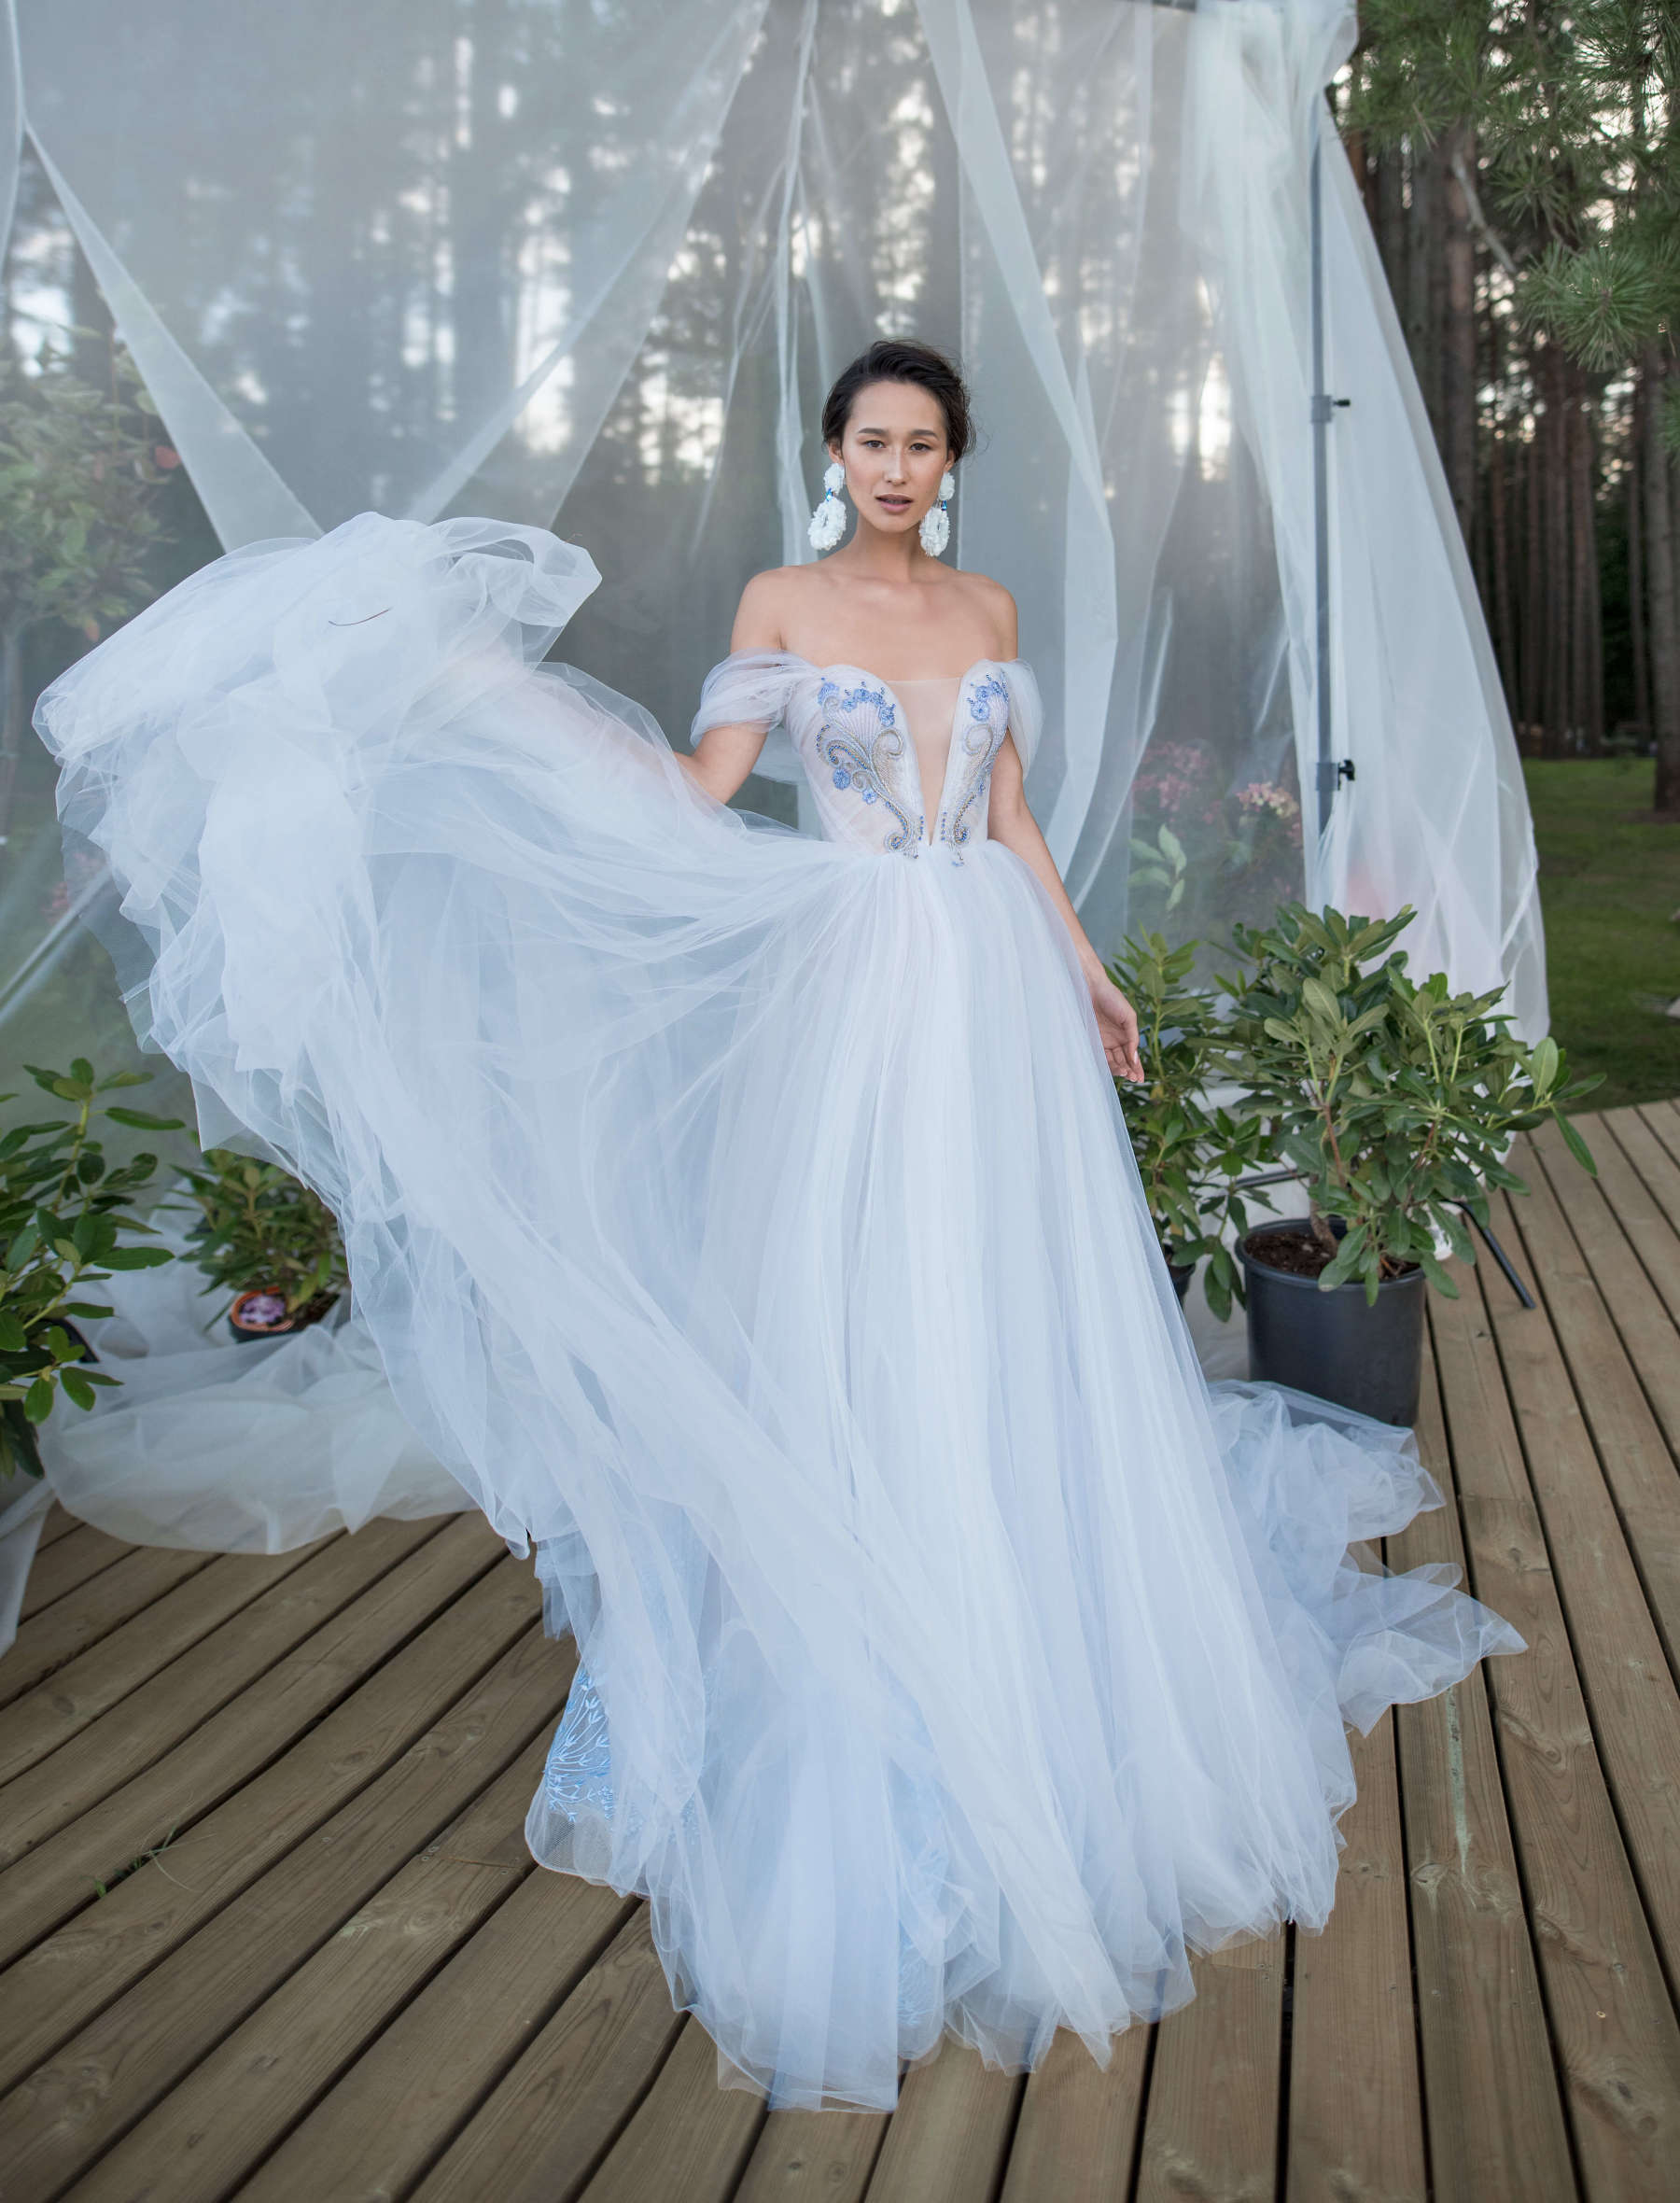 A bride wearing wedding dress with a long train, skirt decorated with lace elements and bodice decorated with beads and stones by Rara Avis at Dell'Amore Bridal, Auckland, NZ. 3